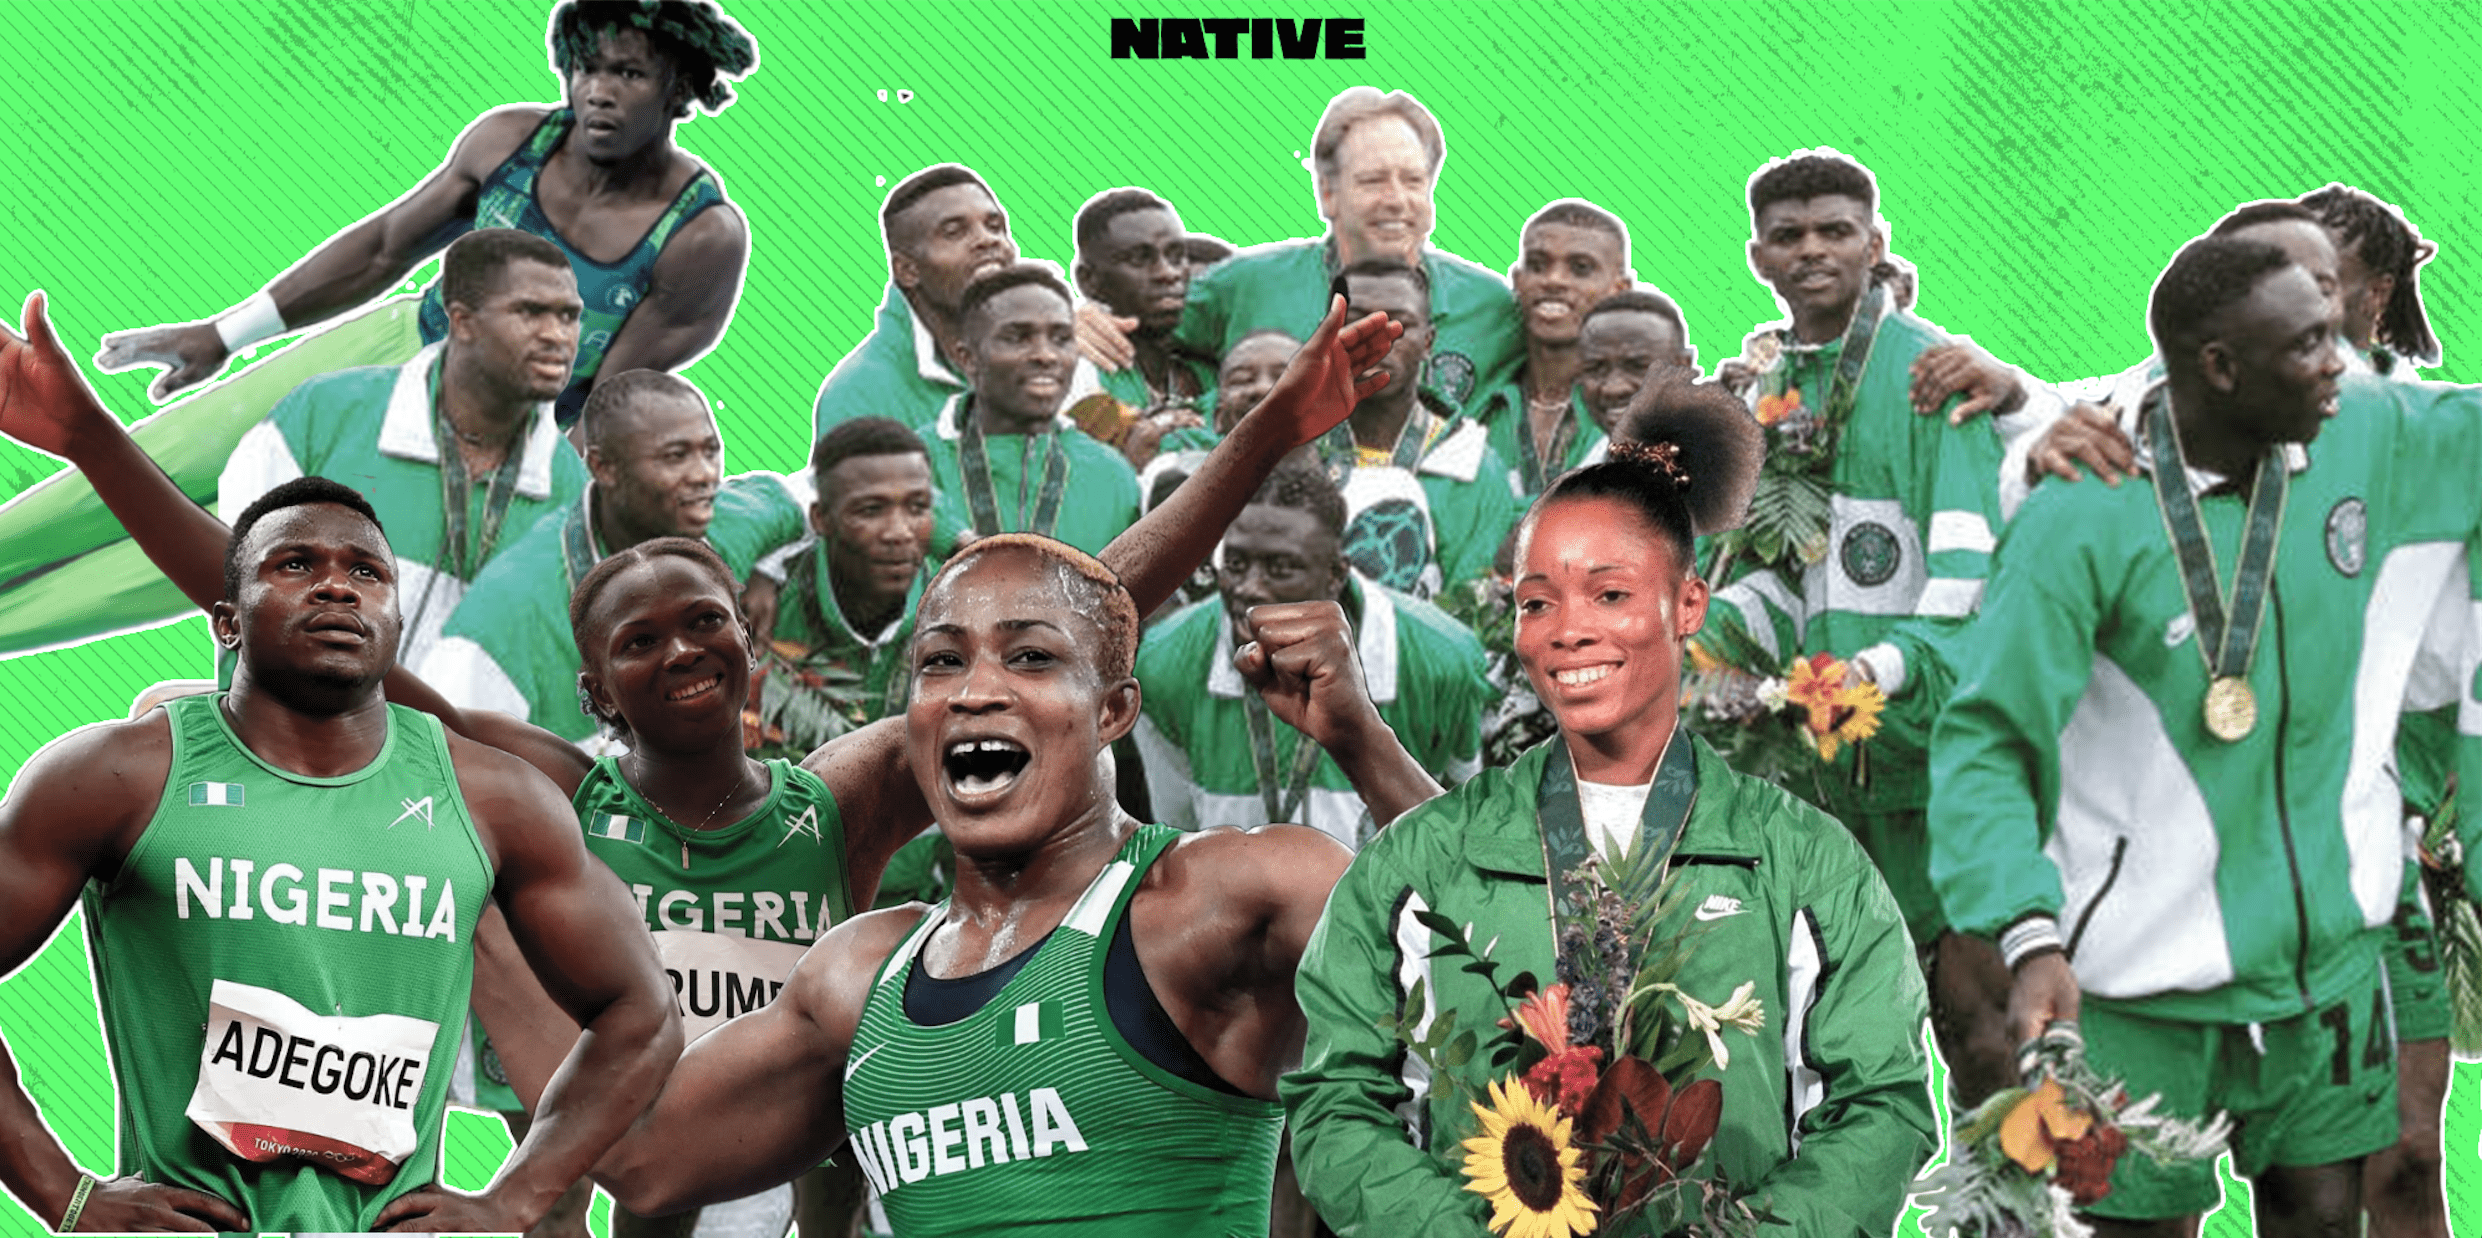 Nigeria’s Participation In The Olympics Was A Sobering Reminder Of Its Negligent Sports Administration